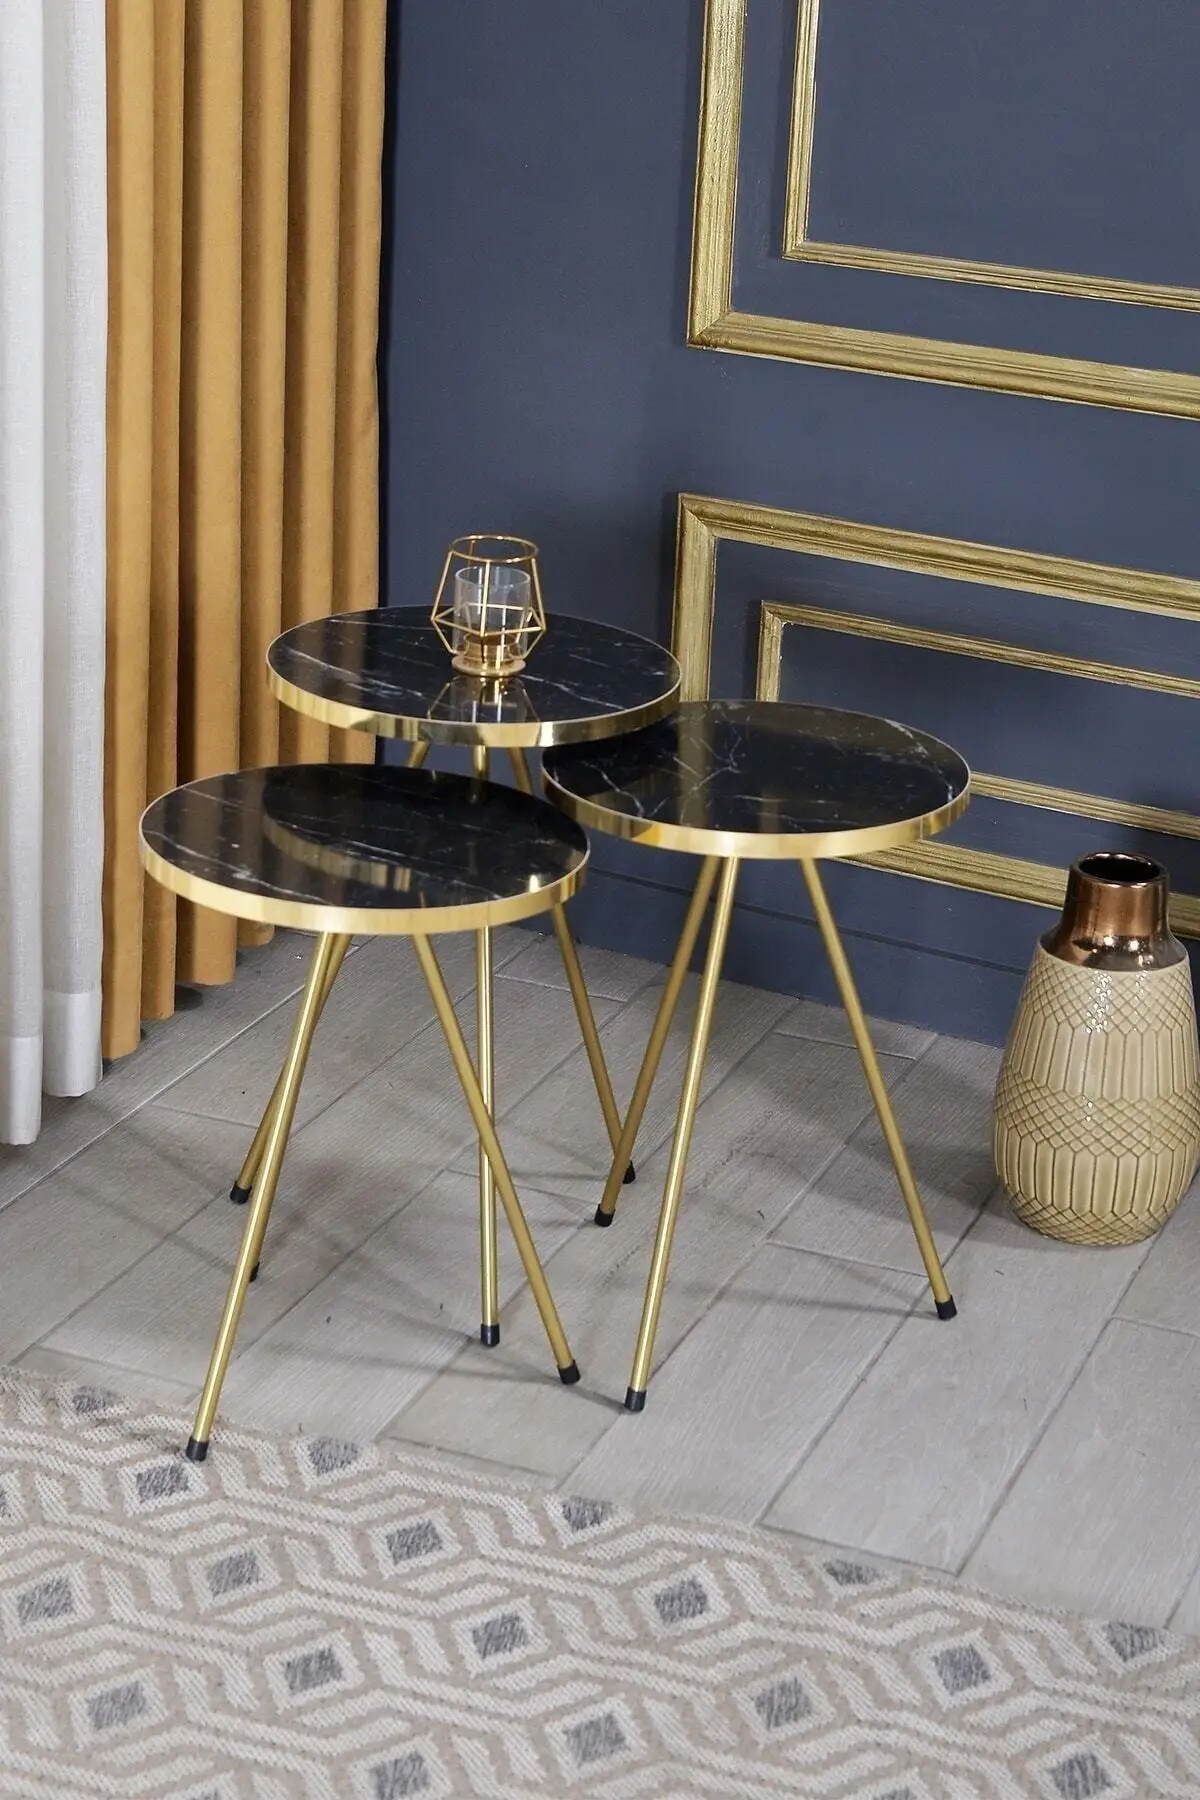 

Modern Zigon Coffee Table 3 Pcs Nordic Gold Metal Toe At Mount Side Coffee Table Tea Coffee Service Table Round Living Room bedside Table